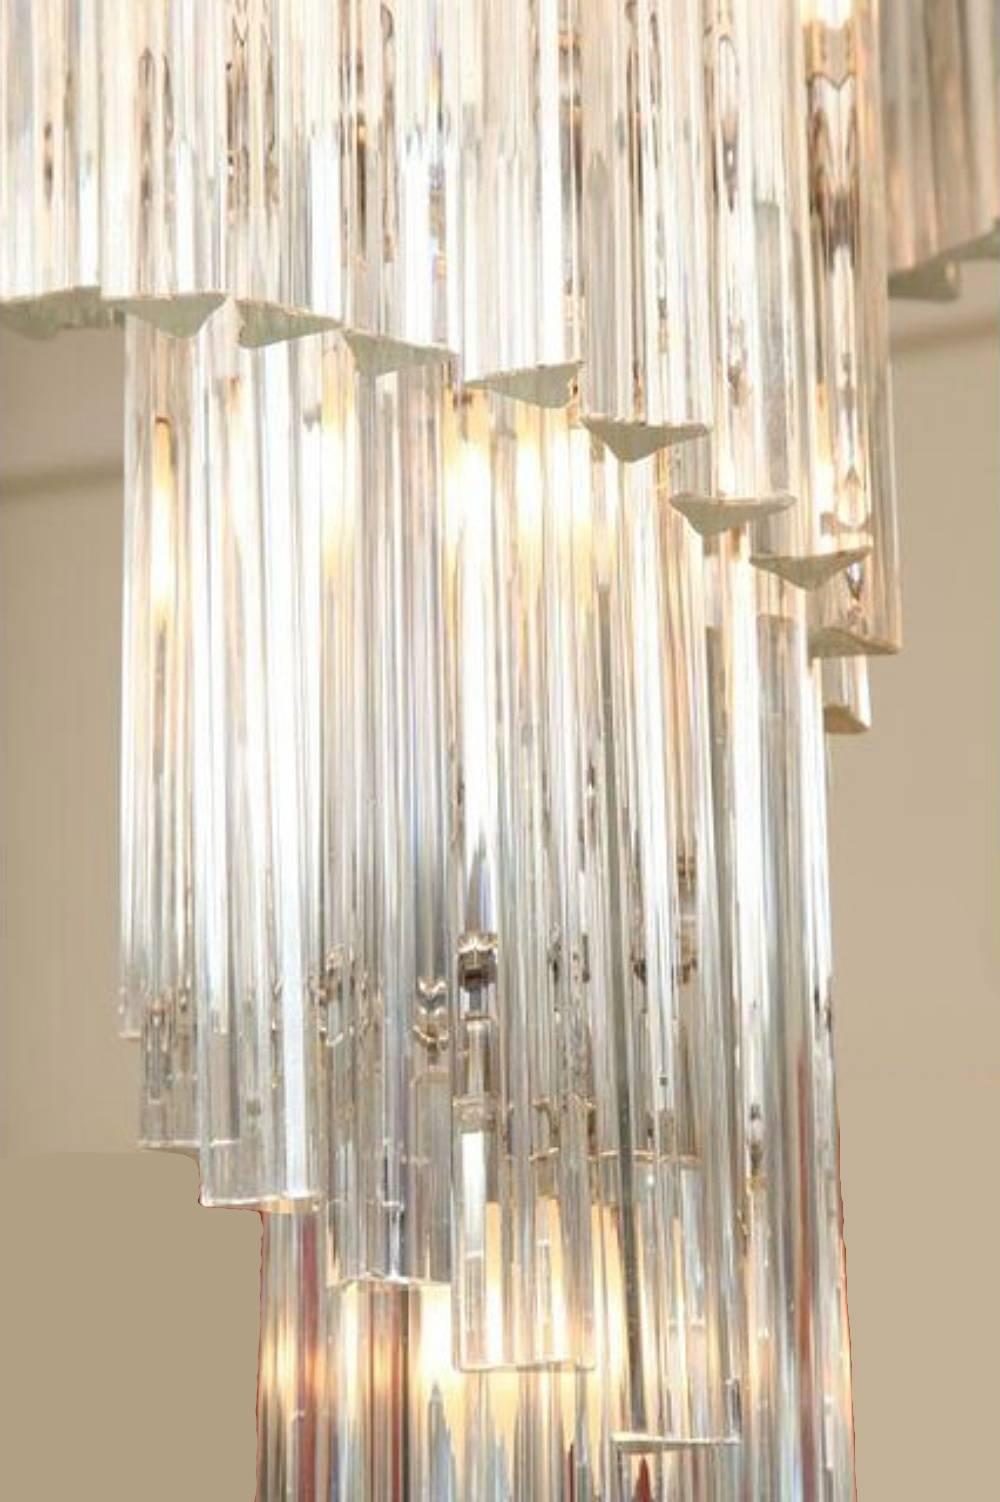 Mid-20th Century Italian Modern Tiered Prism Venini Nickel & Crystal Chandelier, 1960s For Sale